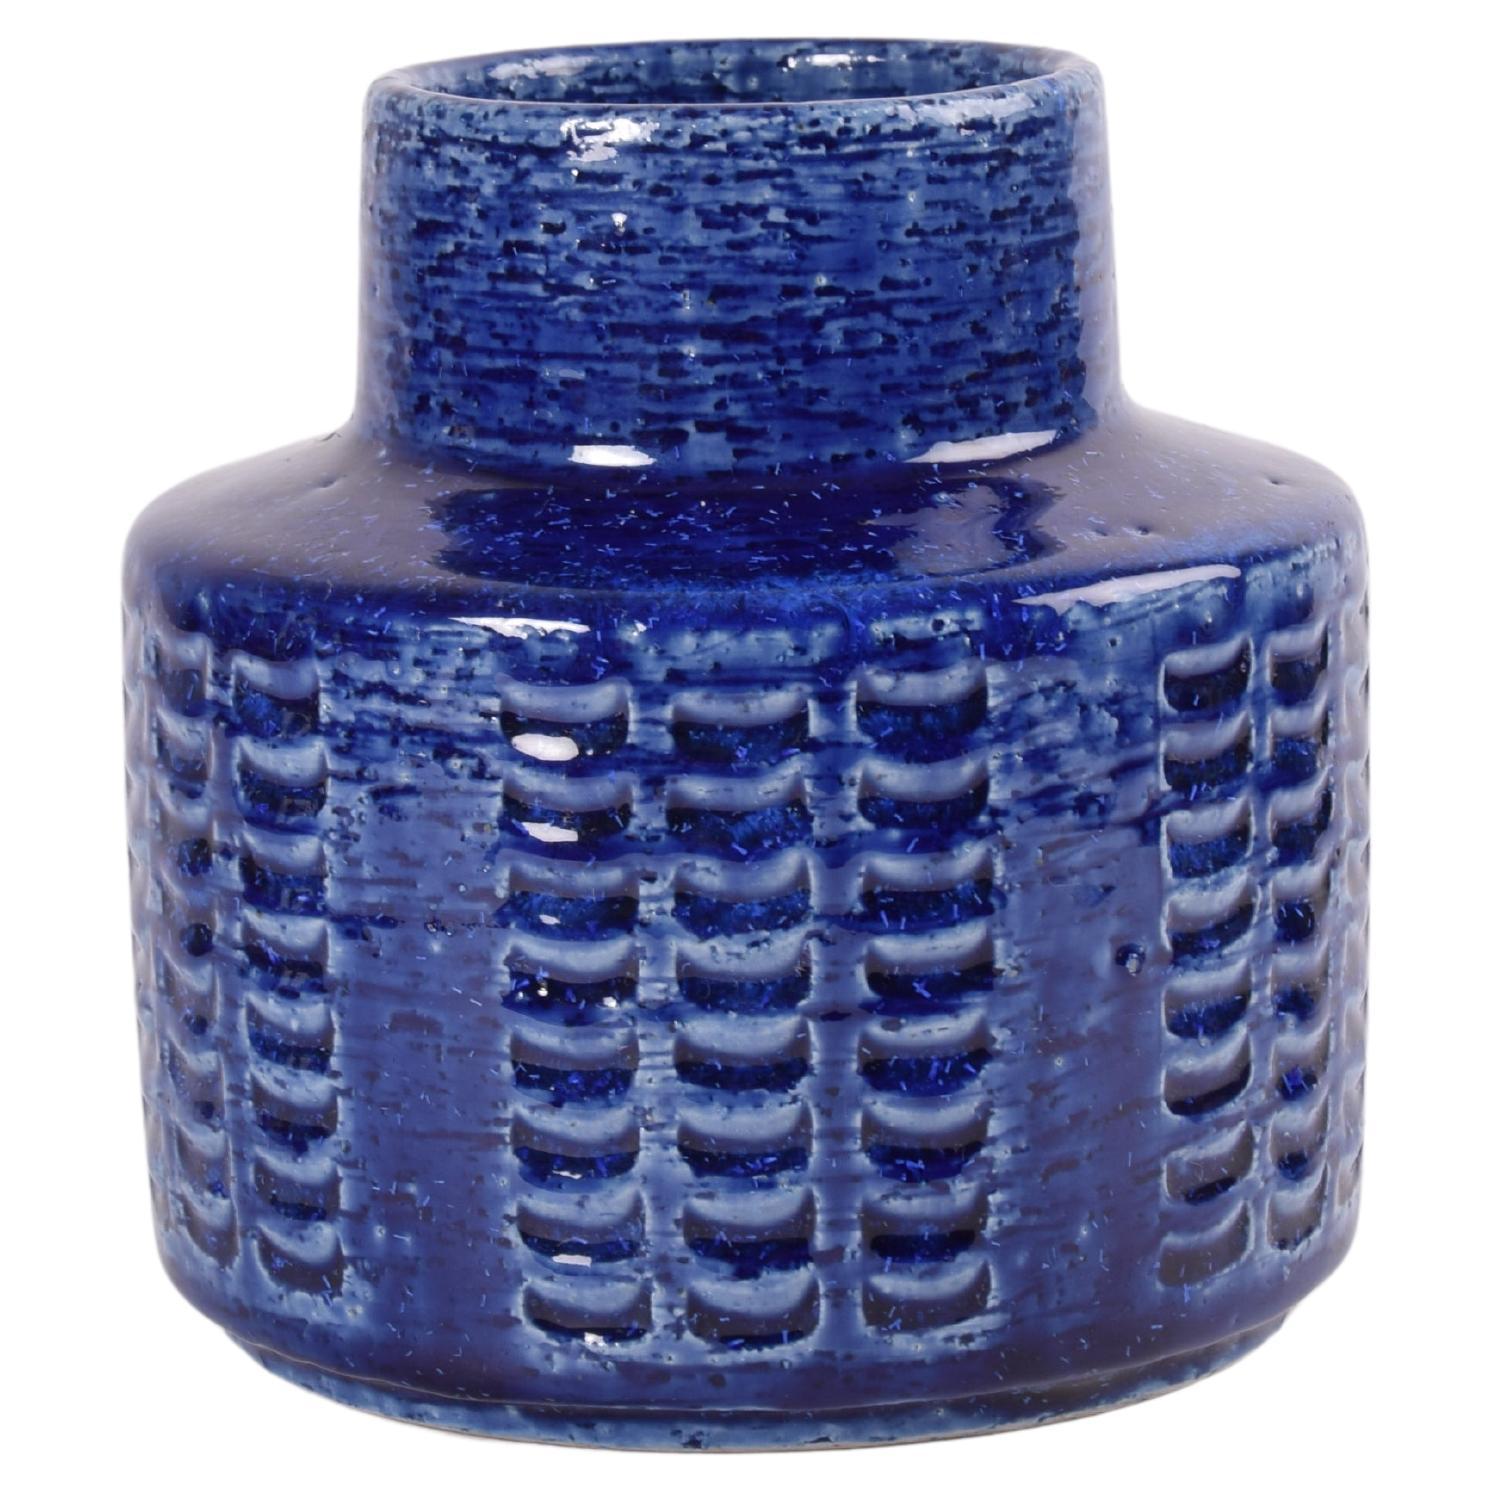 Ceramic vase by Per Linnemann-Schmidt for Palshus Denmark. Made in the 1960s.
It is made with chamotte clay which gives a rough and vivid surface. It has a shiny cobalt blue glaze over a textured decor.

Fully marked on bottom. 

Factory